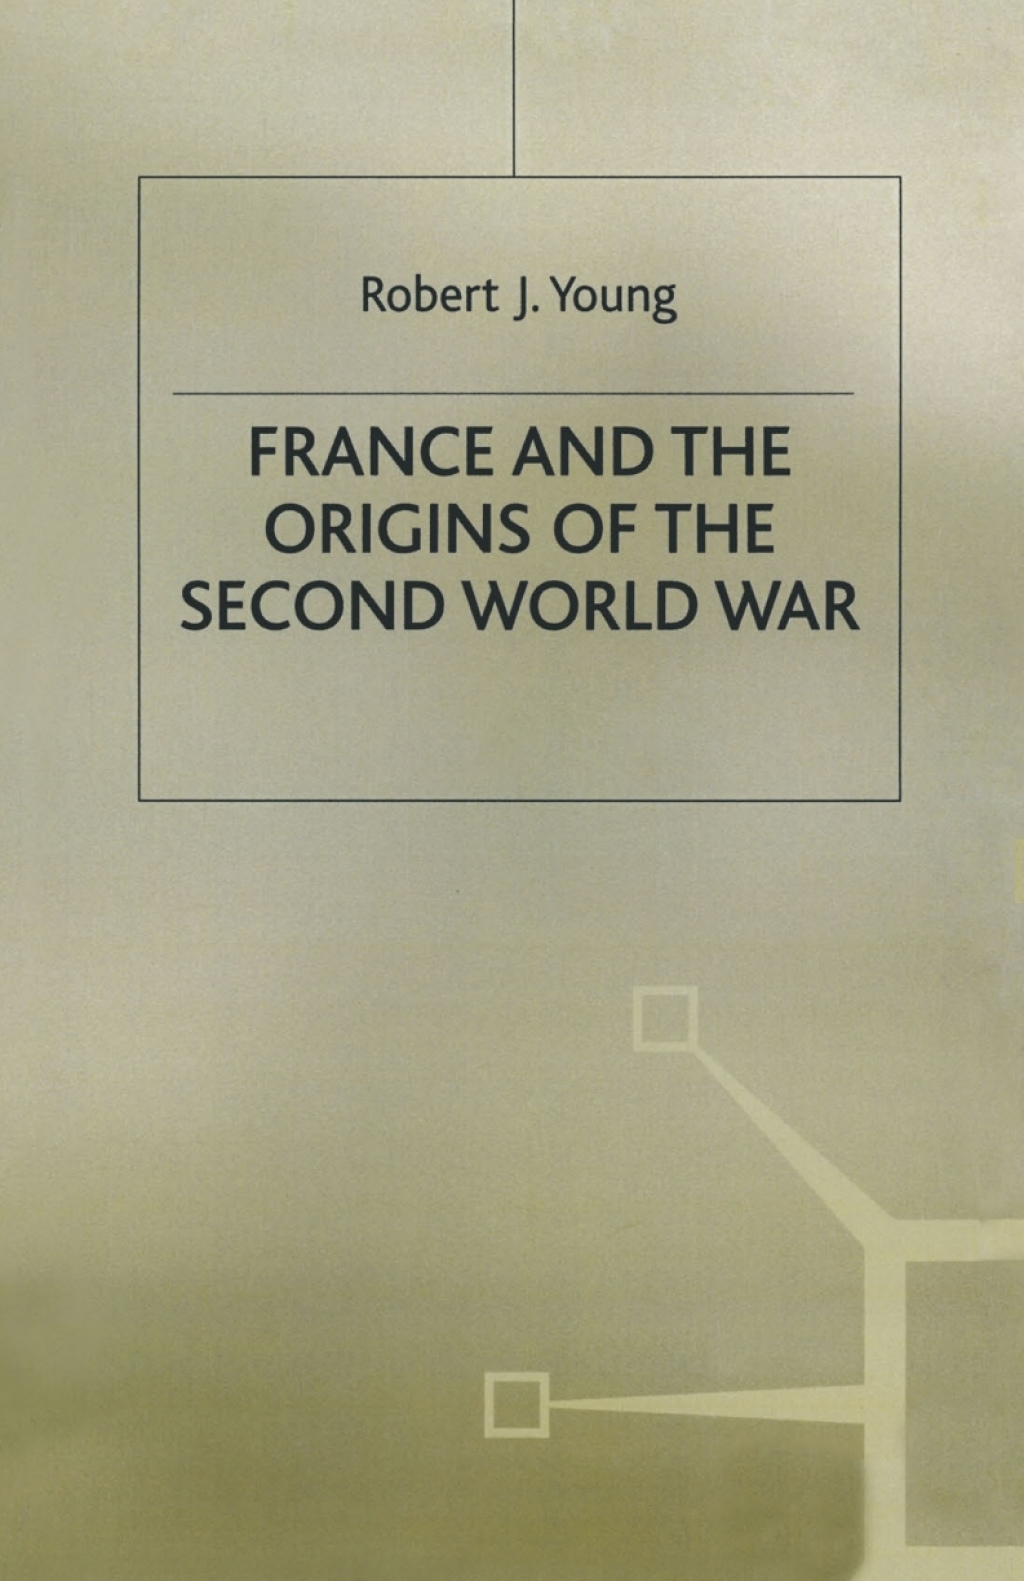 ISBN 9780333575536 product image for France and the Origins of the Second World War - 1st Edition (eBook Rental) | upcitemdb.com